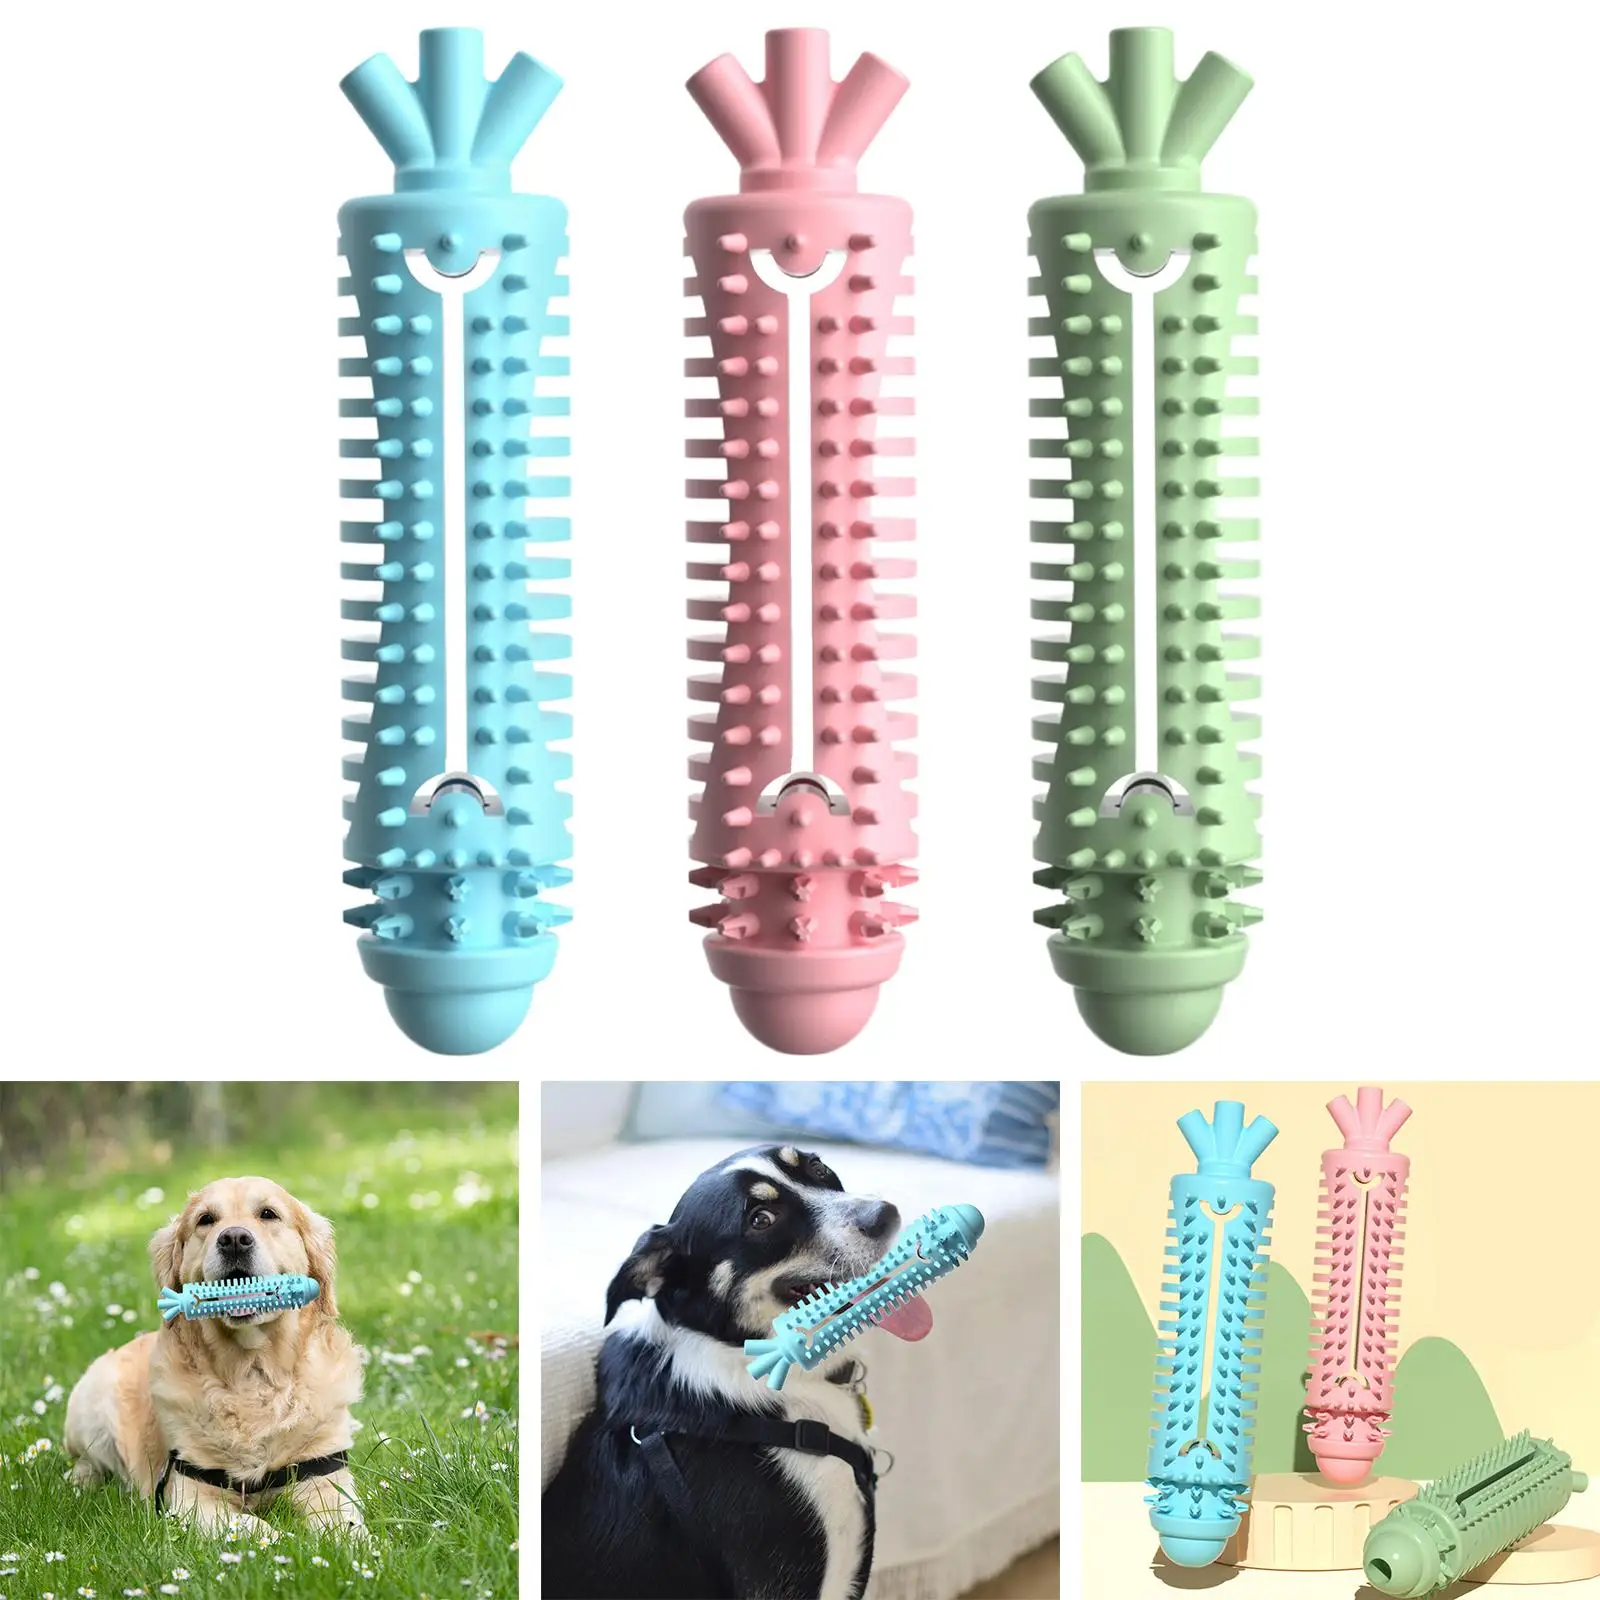 Puppy Teething Toys Educational Toy Increase IQ Bite Resistant Dog Chew Toy